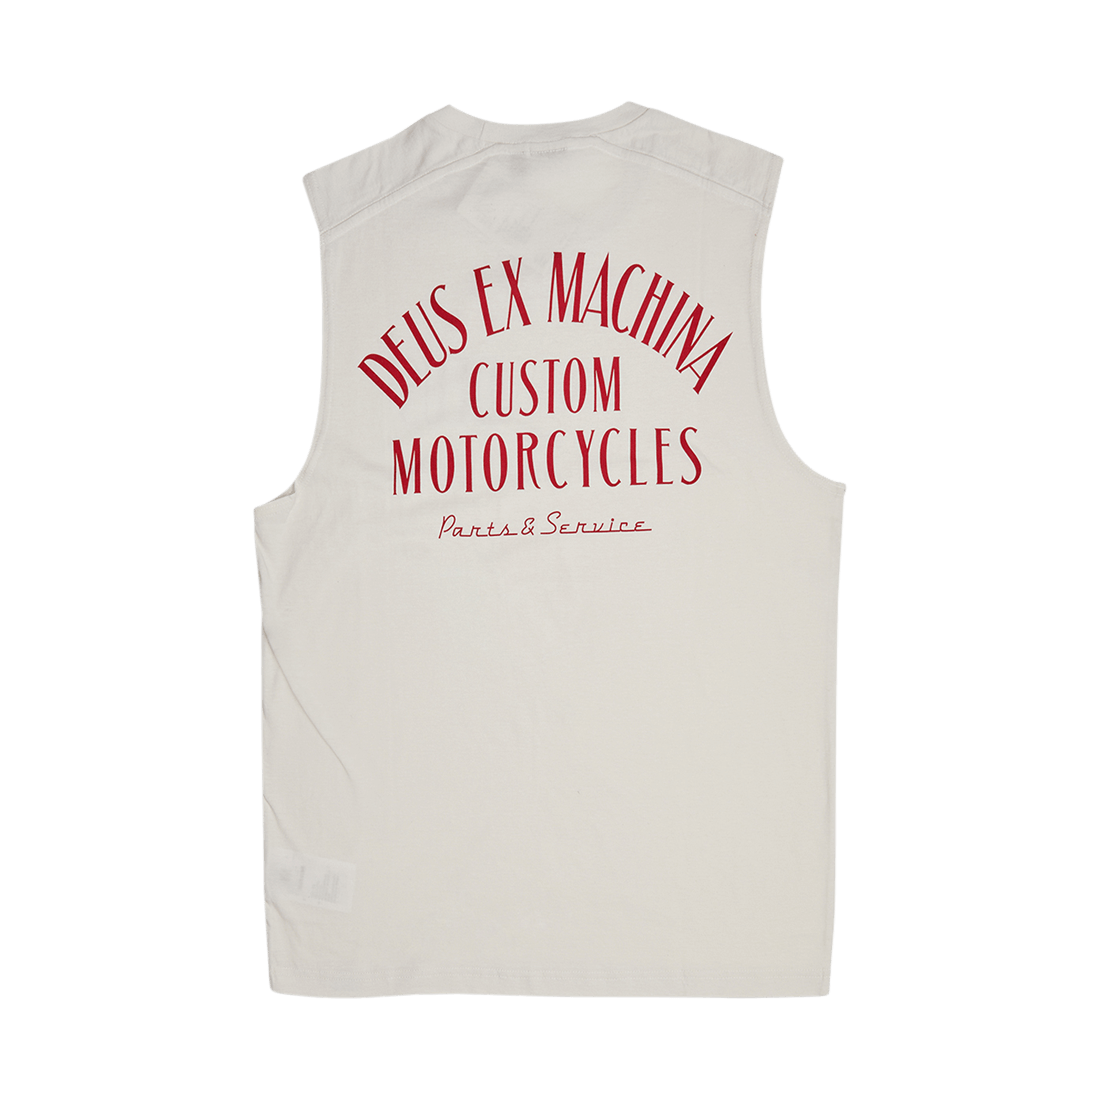 Deus Rosso Muscle - vintage white